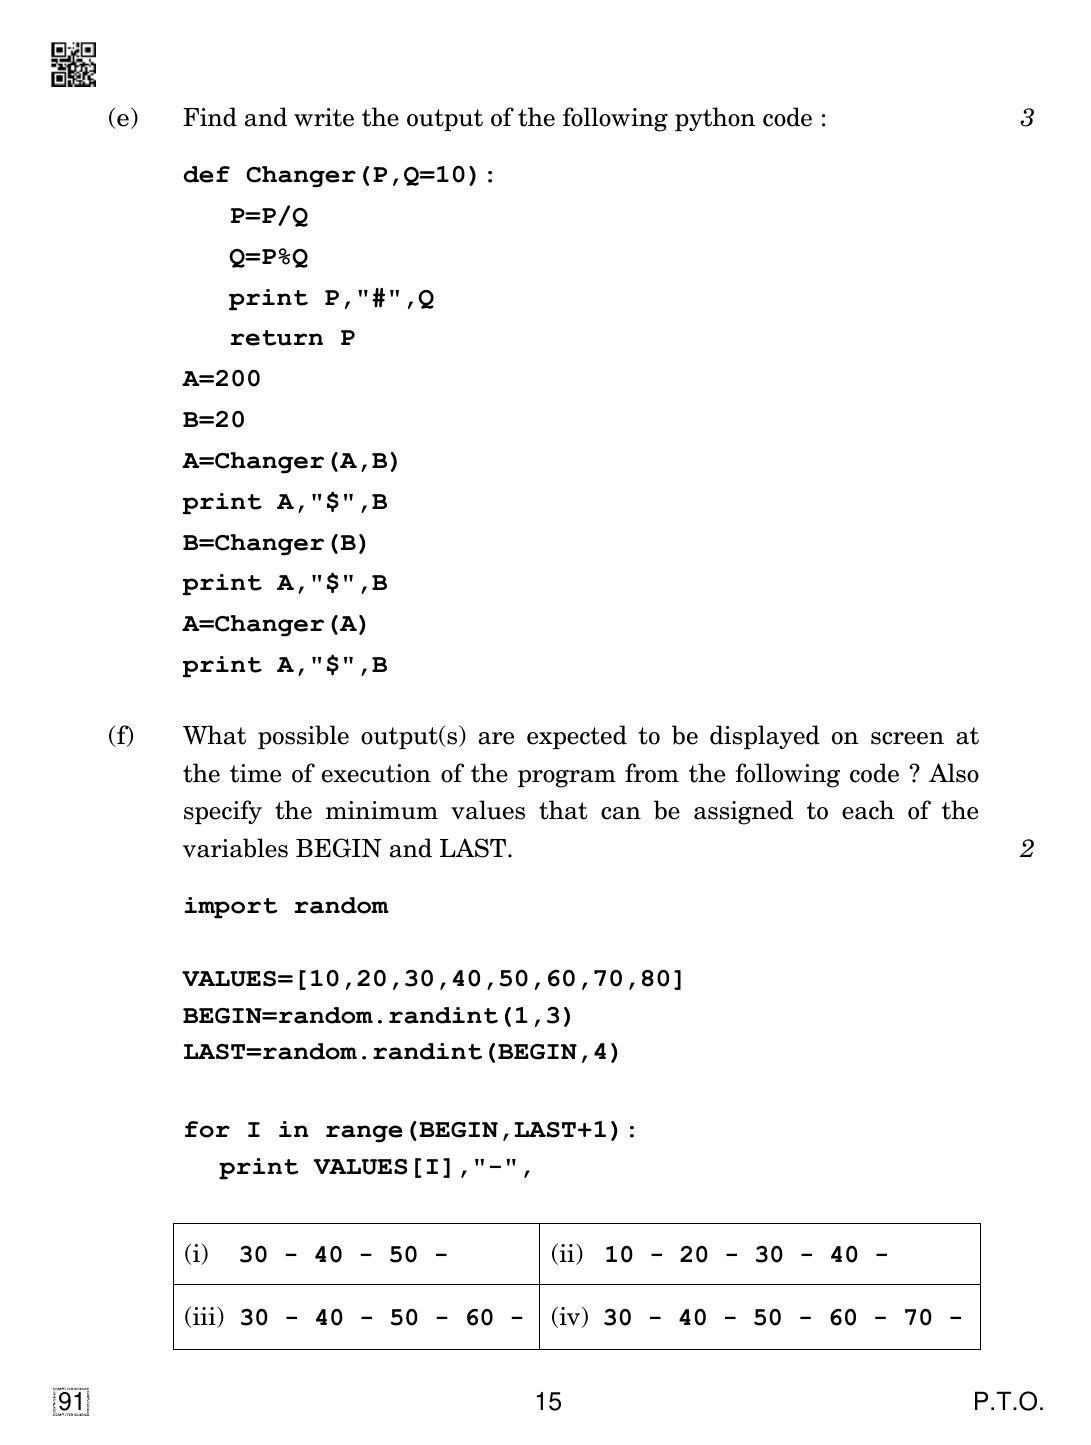 CBSE Class 12 91 Computer Science 2019 Question Paper - Page 15